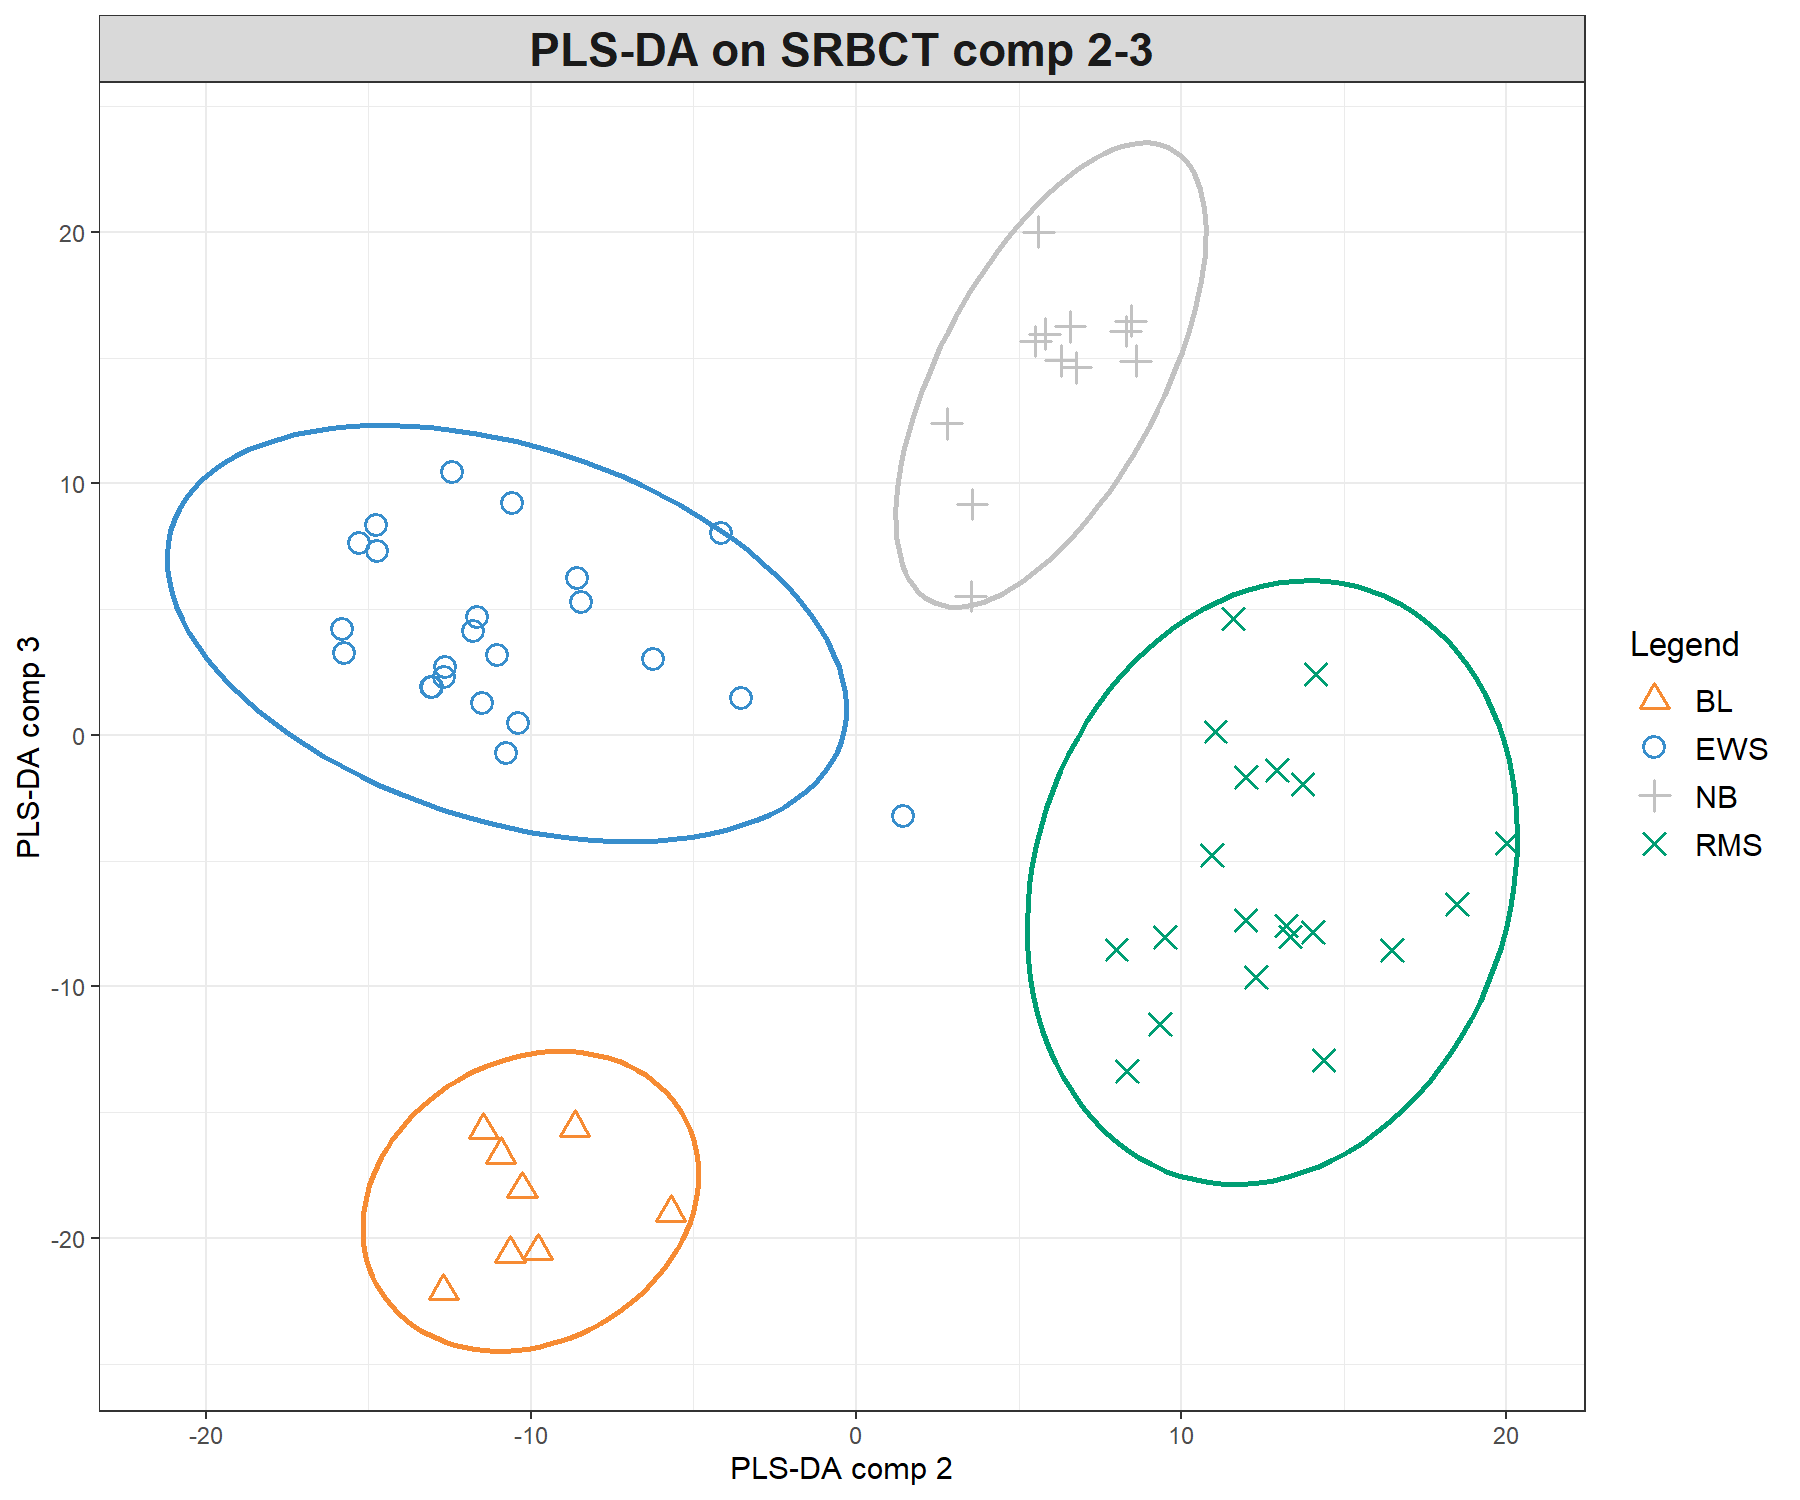 Sample plots from PLS-DA performed on the SRBCT gene expression data. Samples are projected into the space spanned by the first three components. (a) Components 1 and 2 and (b) Components 1 and 3. Samples are coloured by their tumour subtypes. Component 1 discriminates RMS + EWS vs. NB + BL, component 2 discriminates RMS + NB vs. EWS + BL, while component 3 discriminates further the NB and BL groups. It is the combination of all three components that enables us to discriminate all classes.